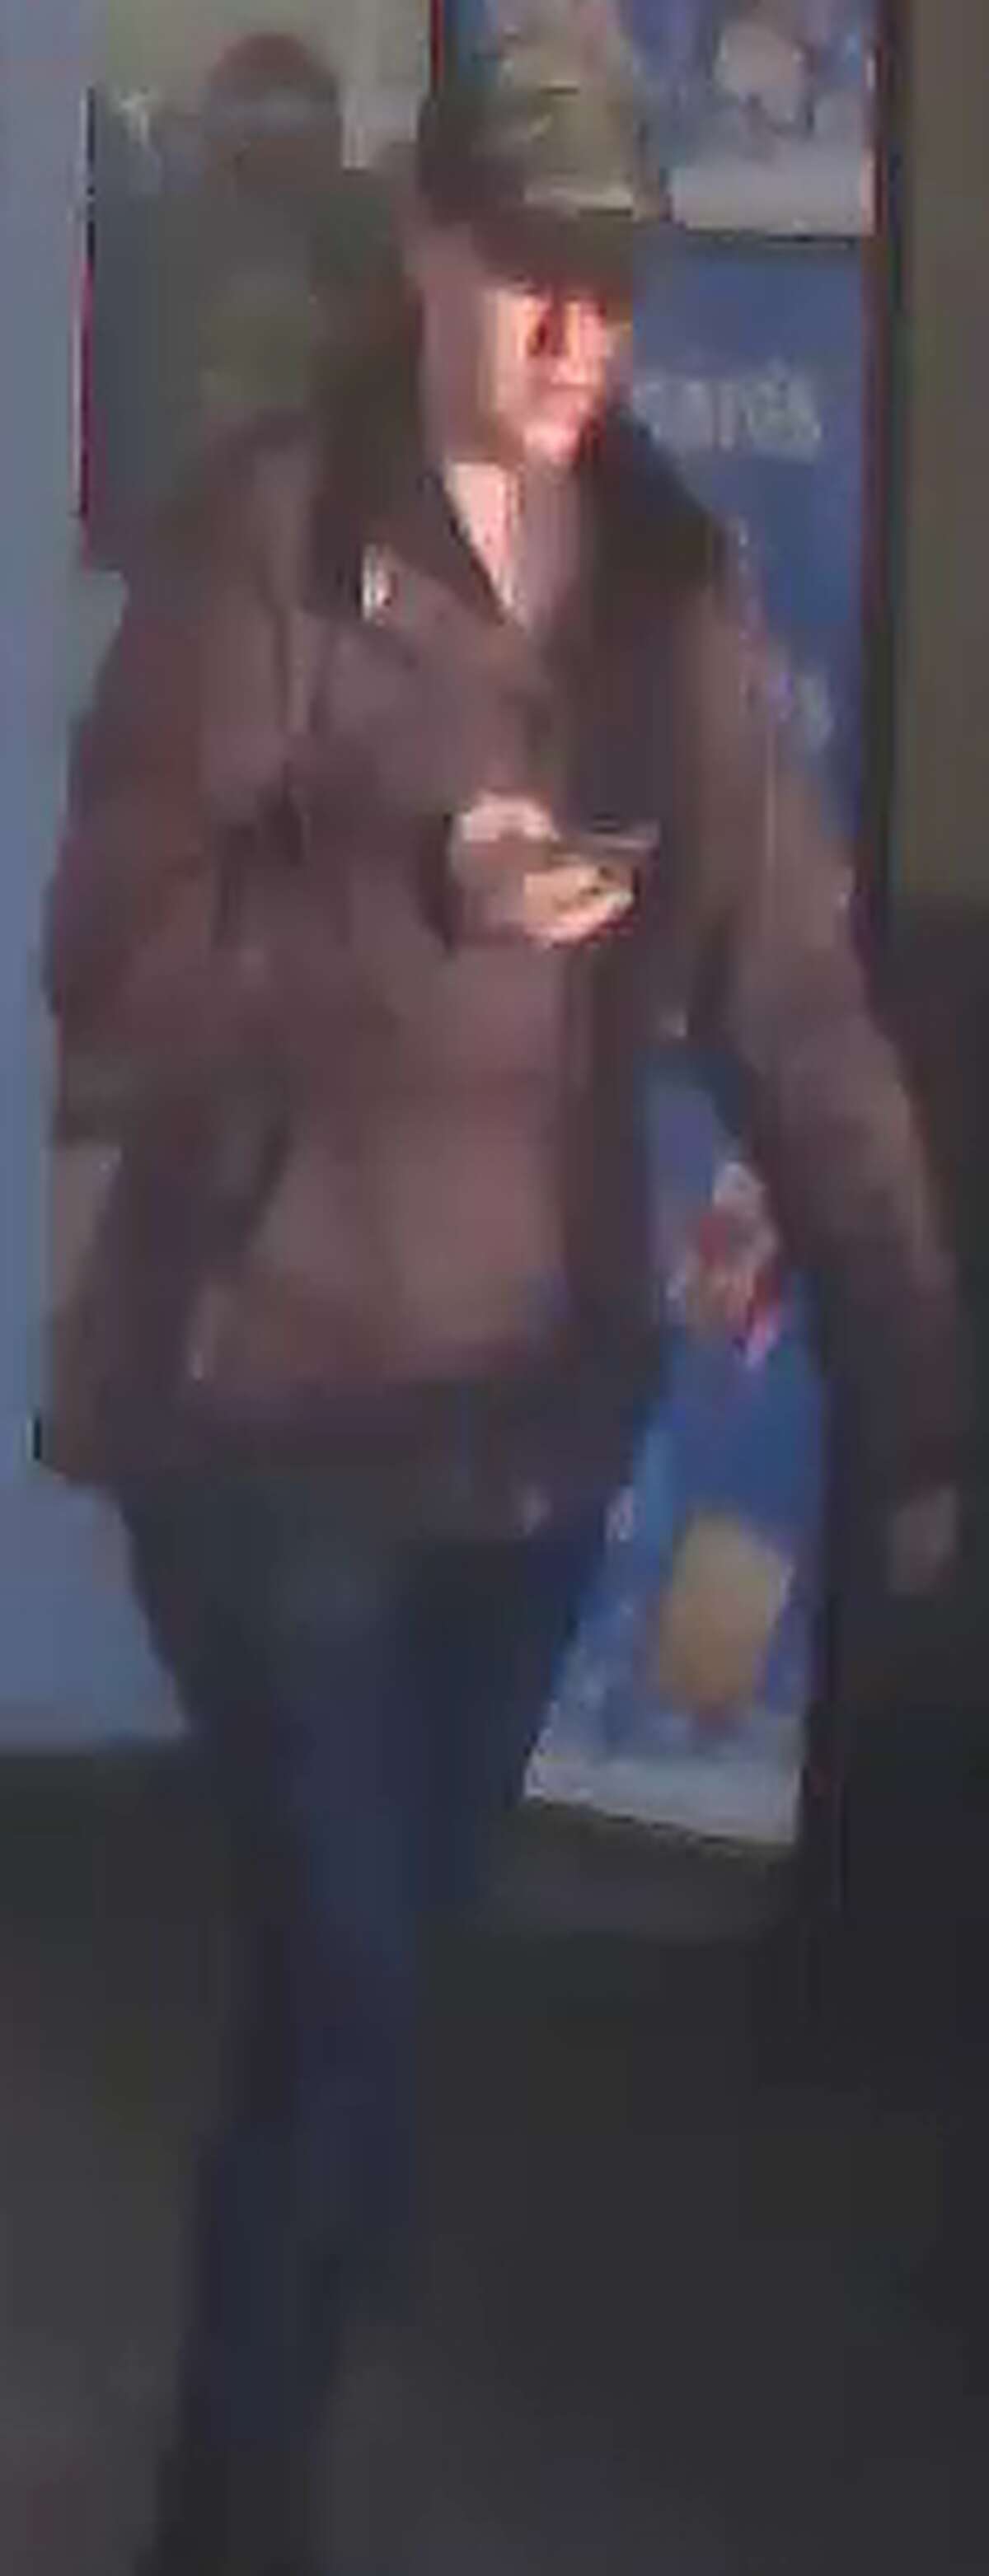 Midland Police are seeking assistance in identifying two women suspected of larceny from a north Midland store on Feb. 3, 2020.